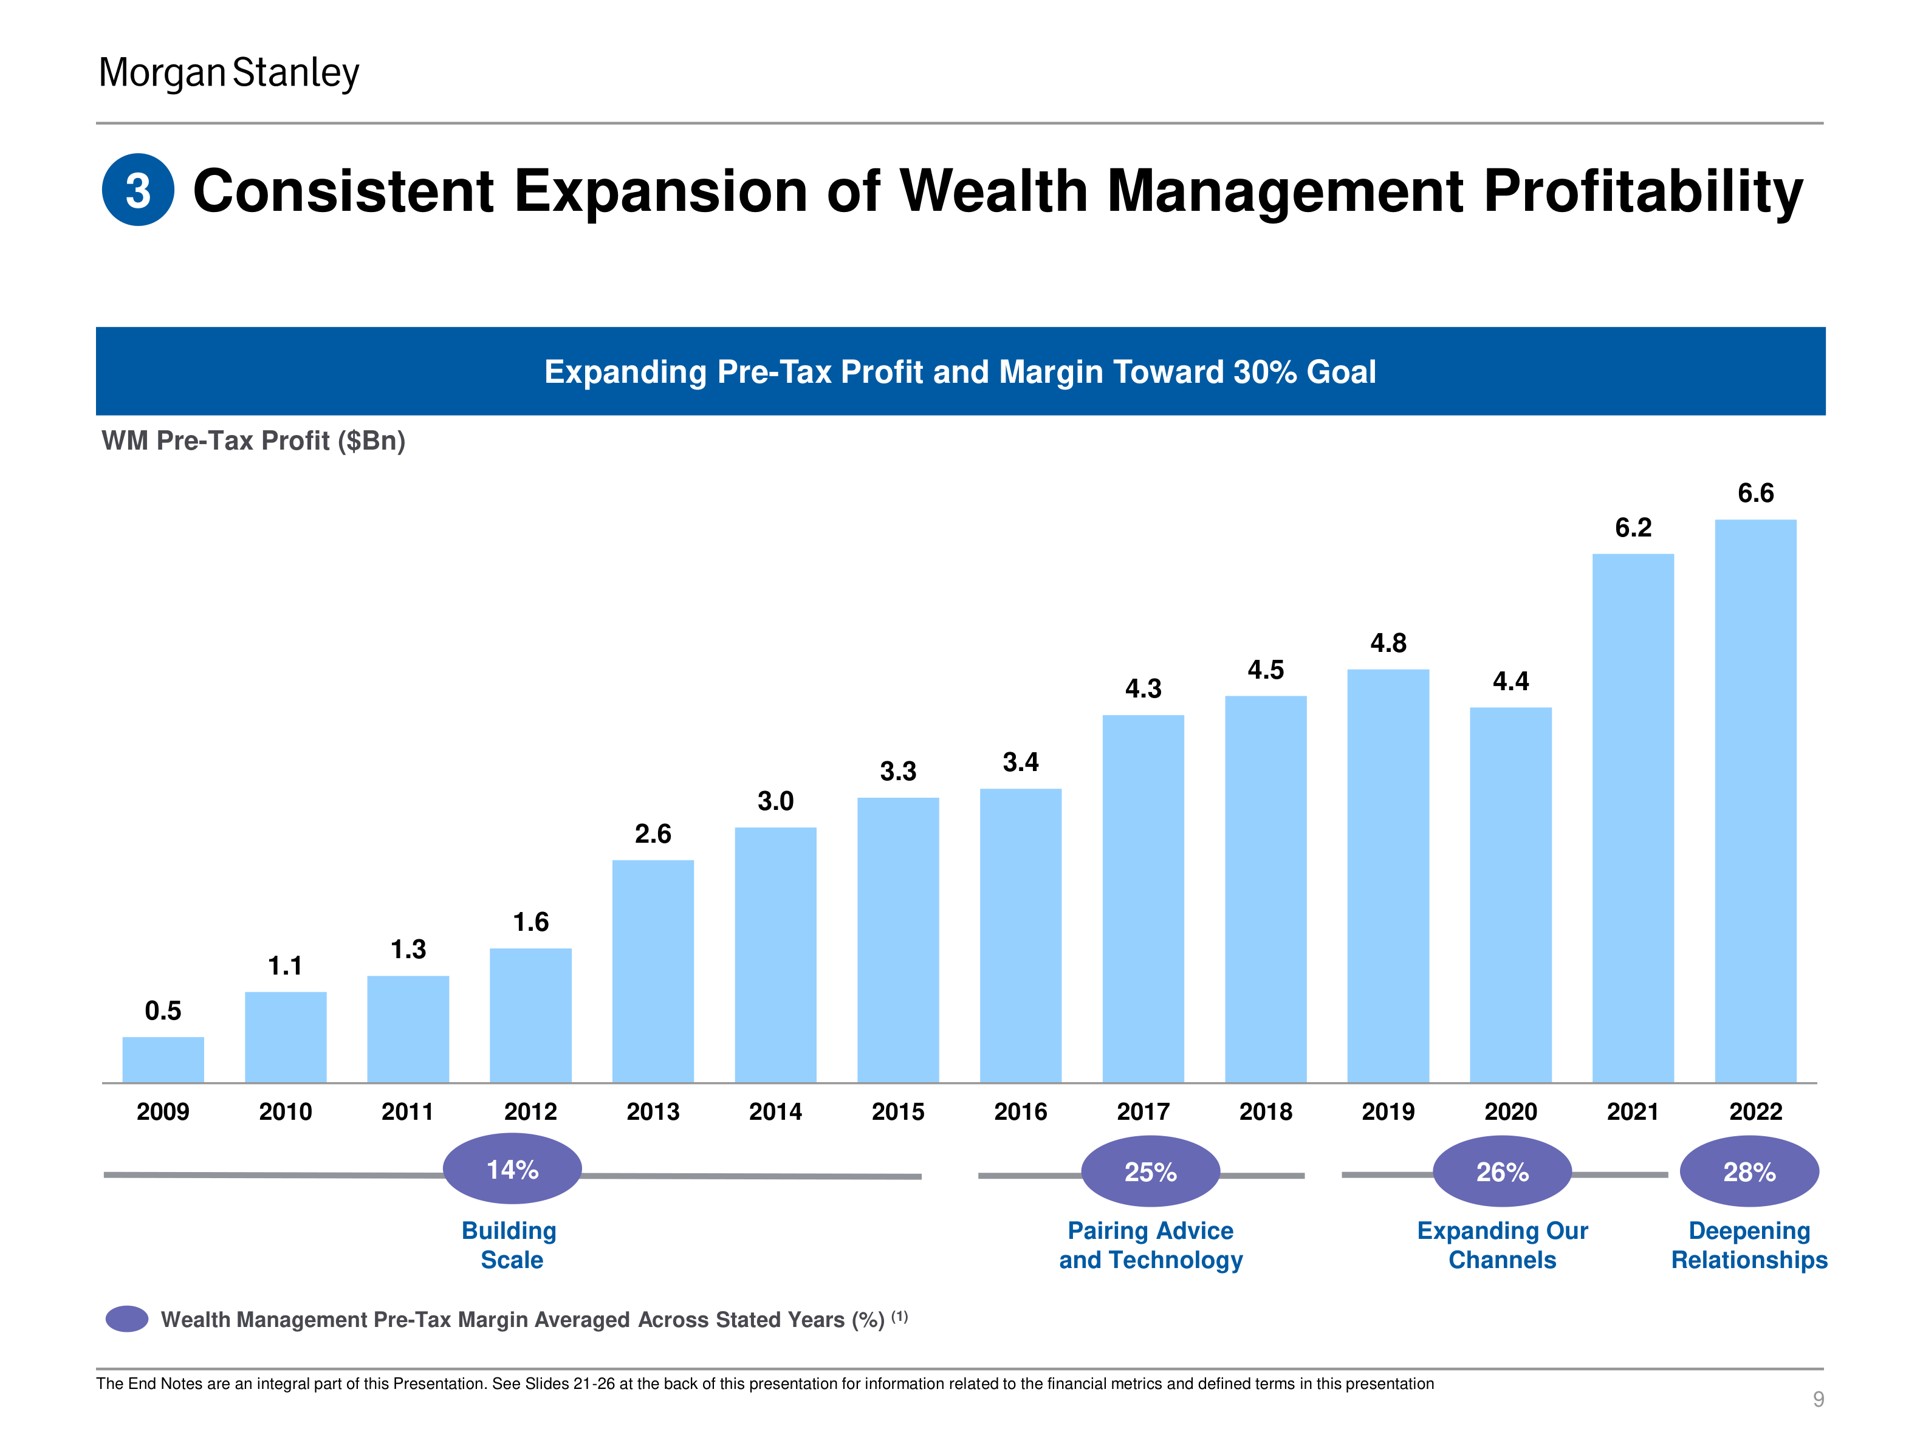 consistent expansion of wealth management profitability | Morgan Stanley